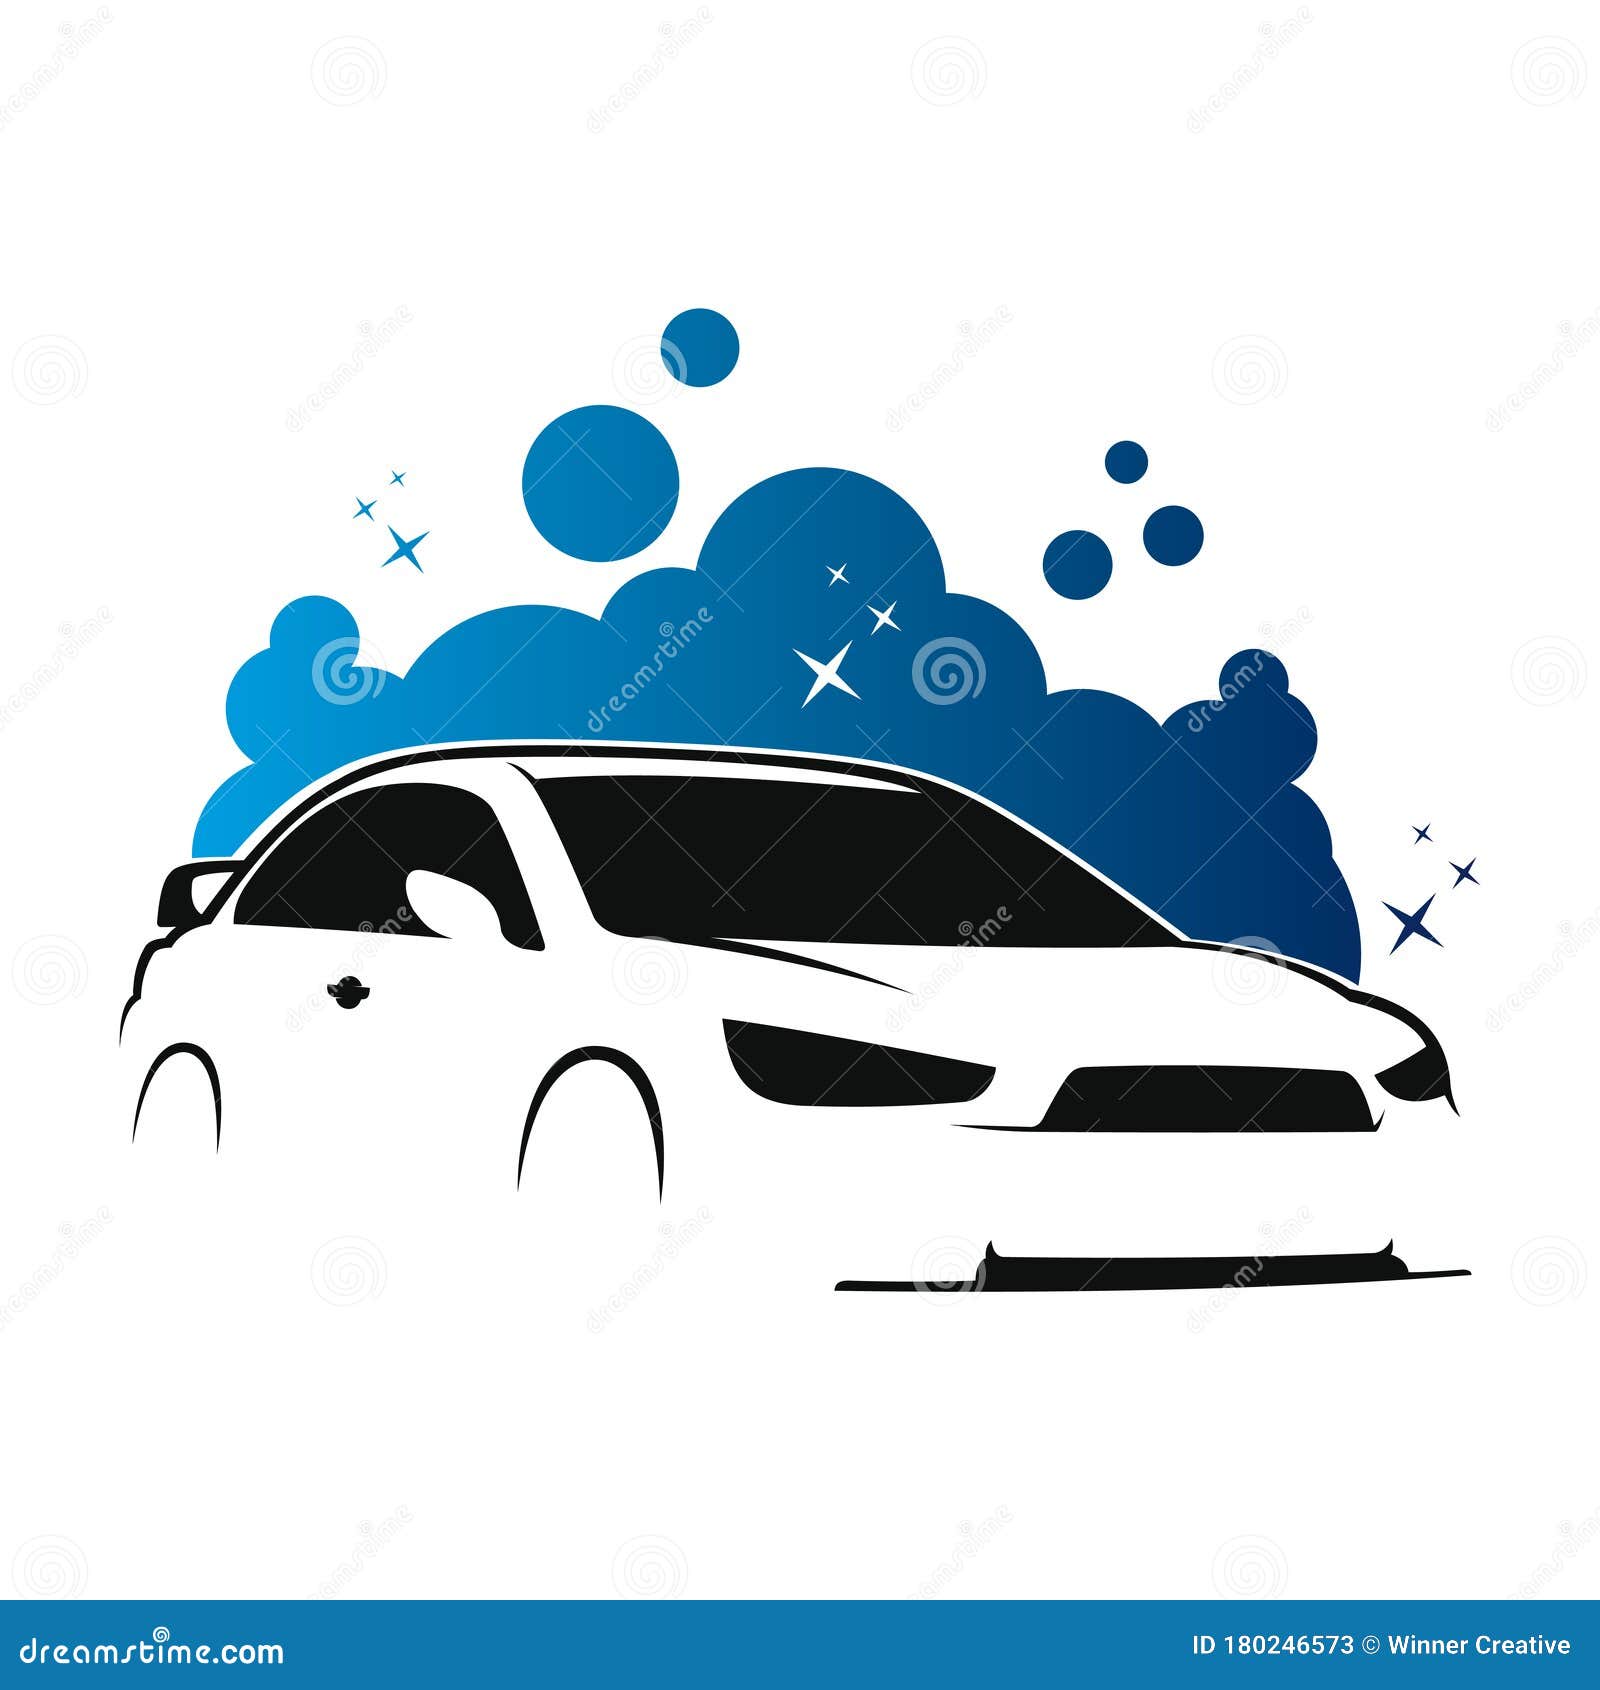 Car Wash and Clean Logo Vector Stock Vector - Illustration of